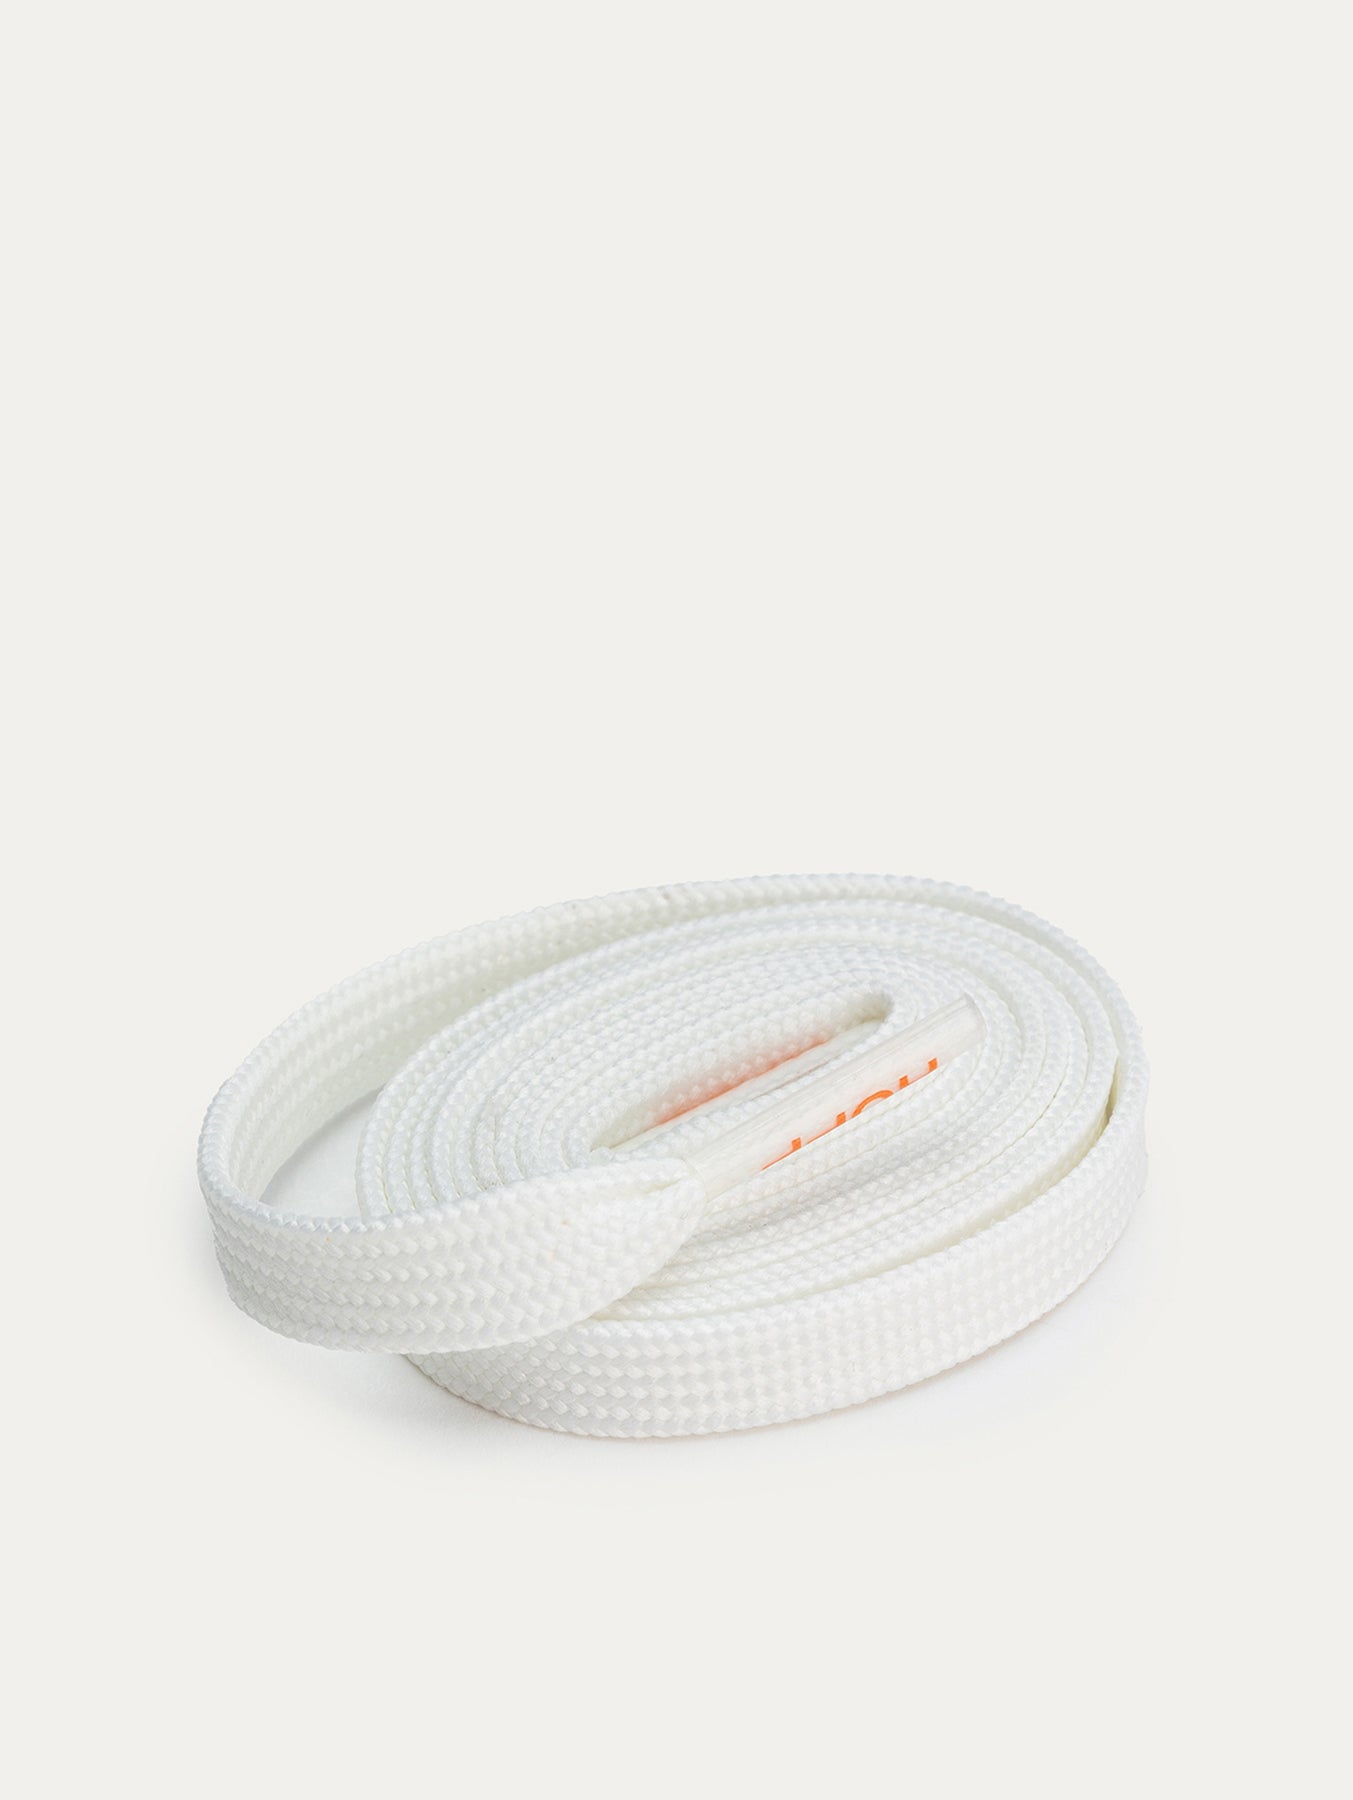 NATURAL WHITE LACES